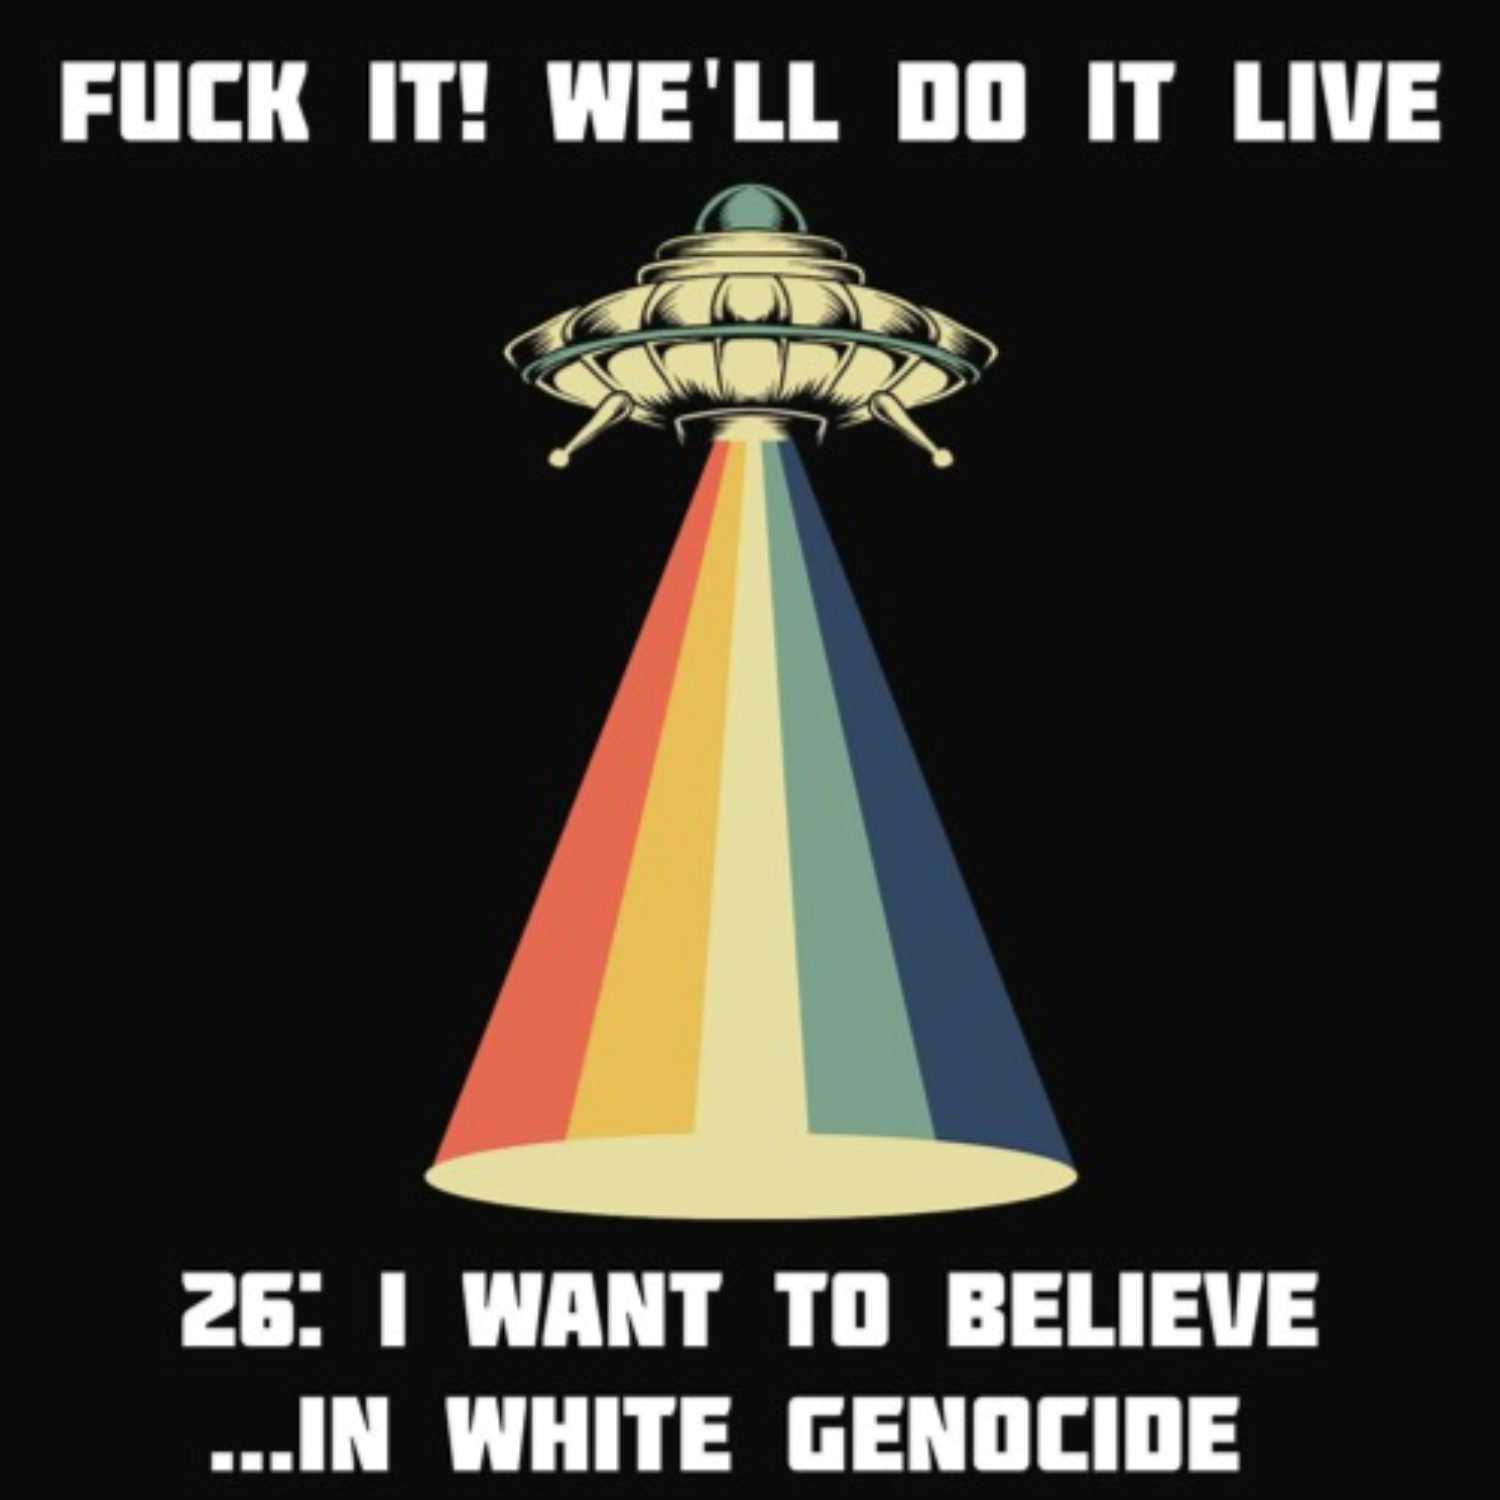 Fμck It, We'll Do it Live! Episode 26: I Want To Believe...In White Genocide